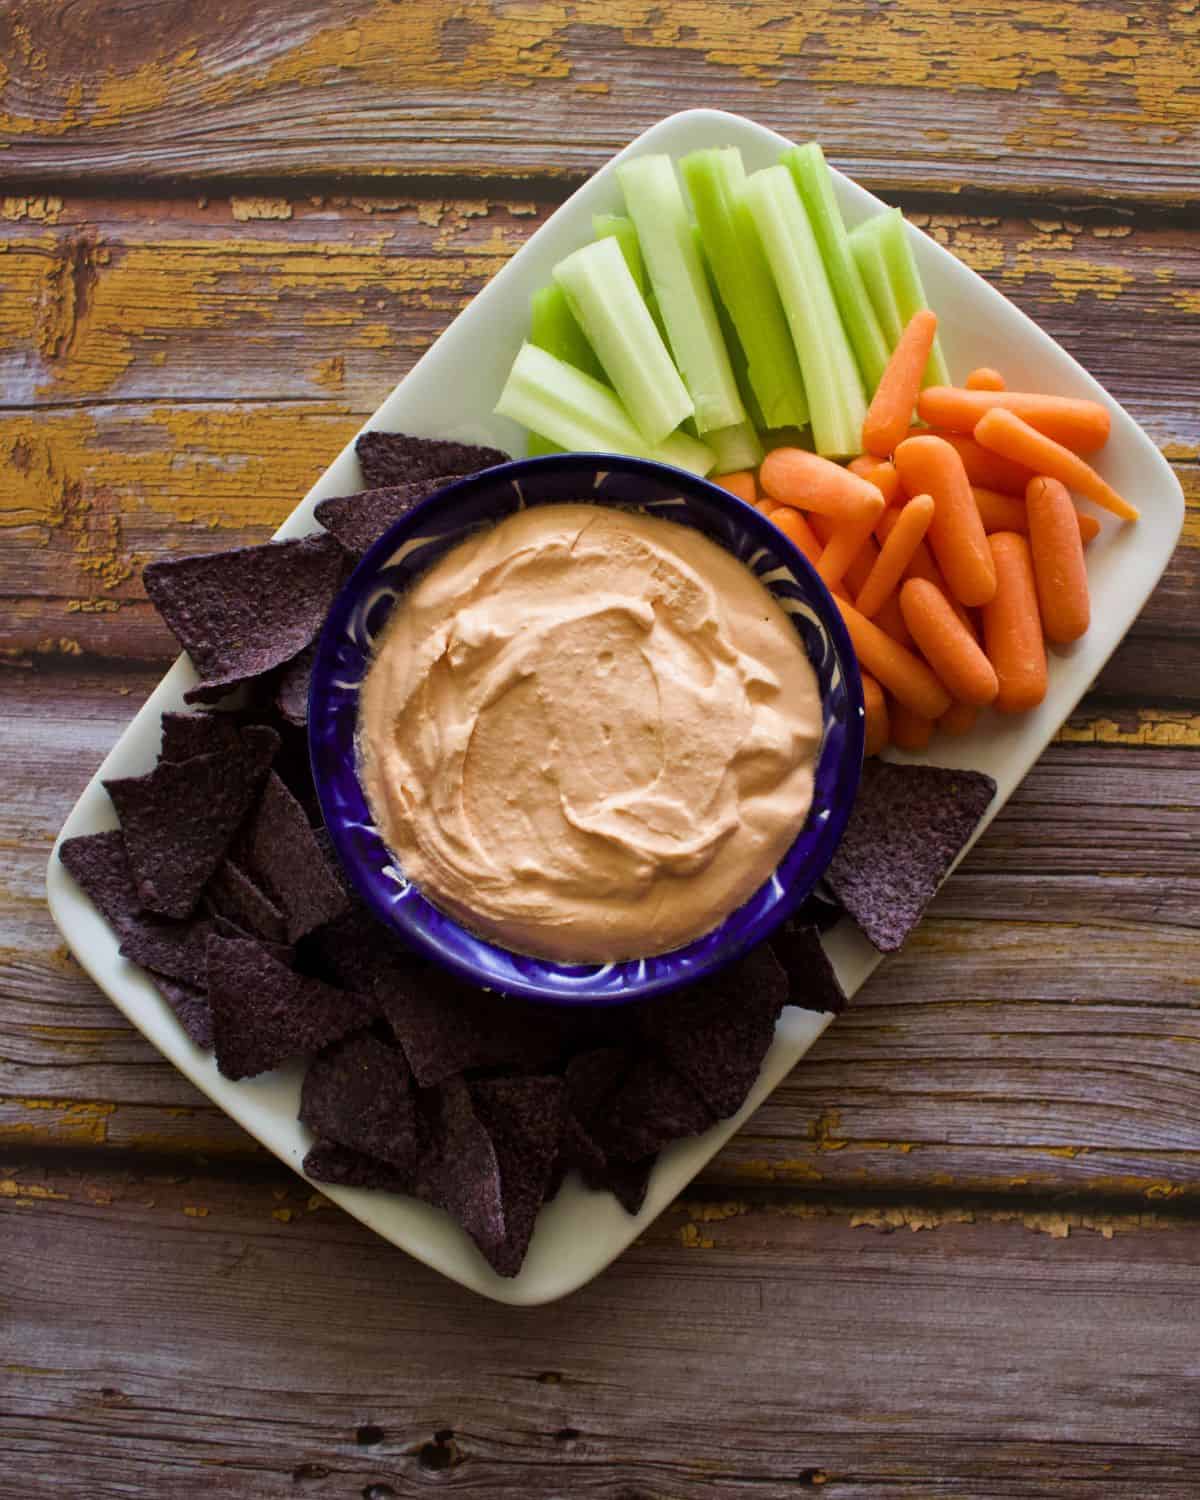 Cream cheese and salsa dip served in a blue bowl surrounded by veggie dippers and chips.